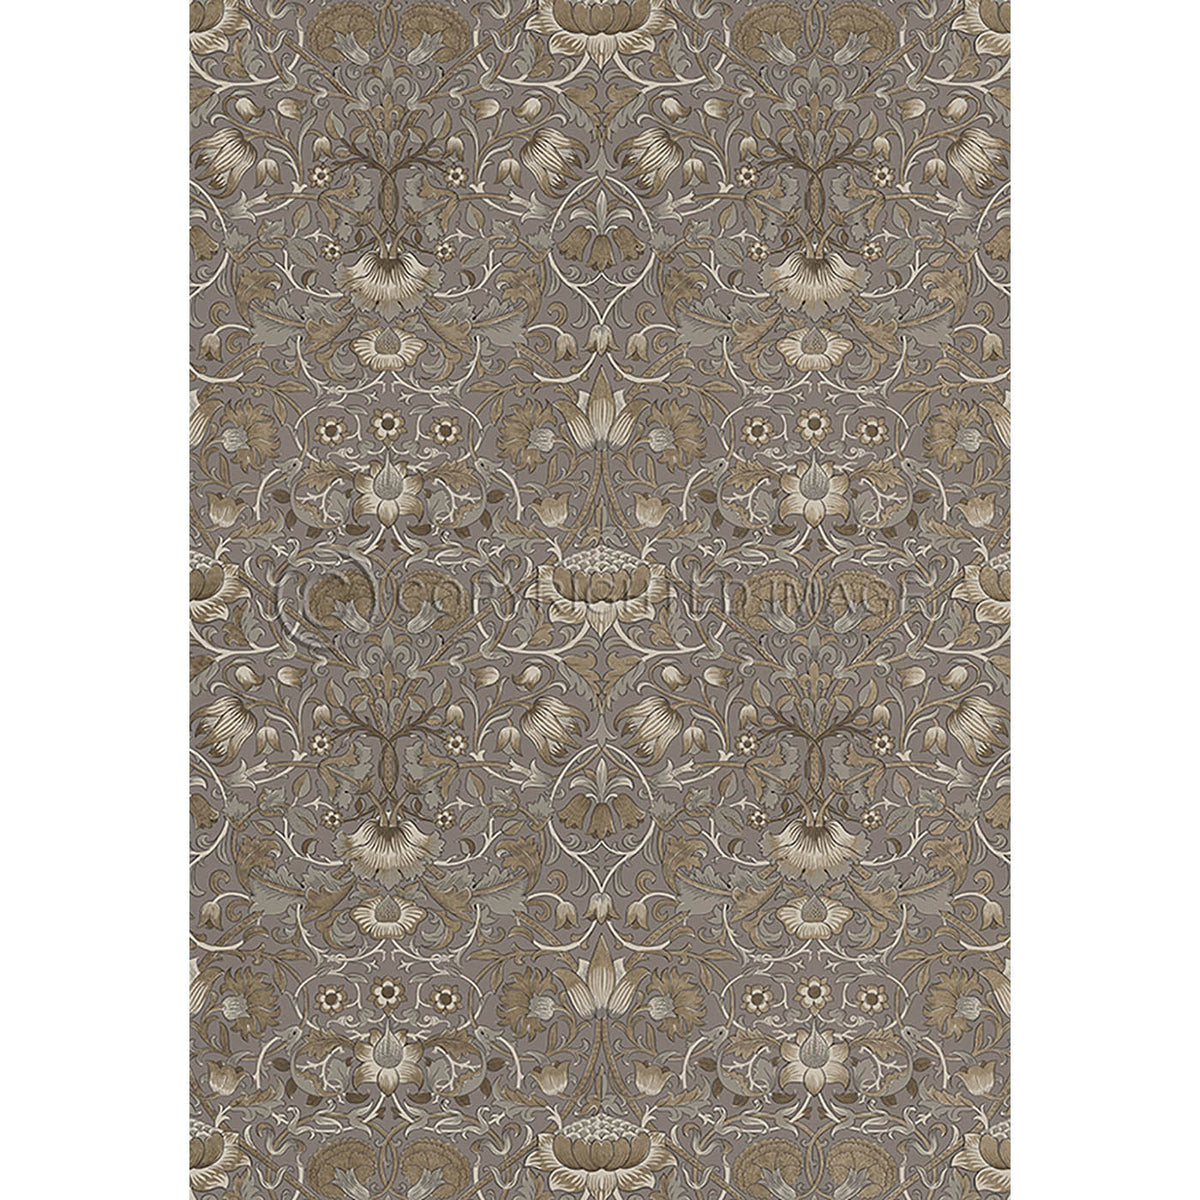 Lodden Taupe and Gold 52x76